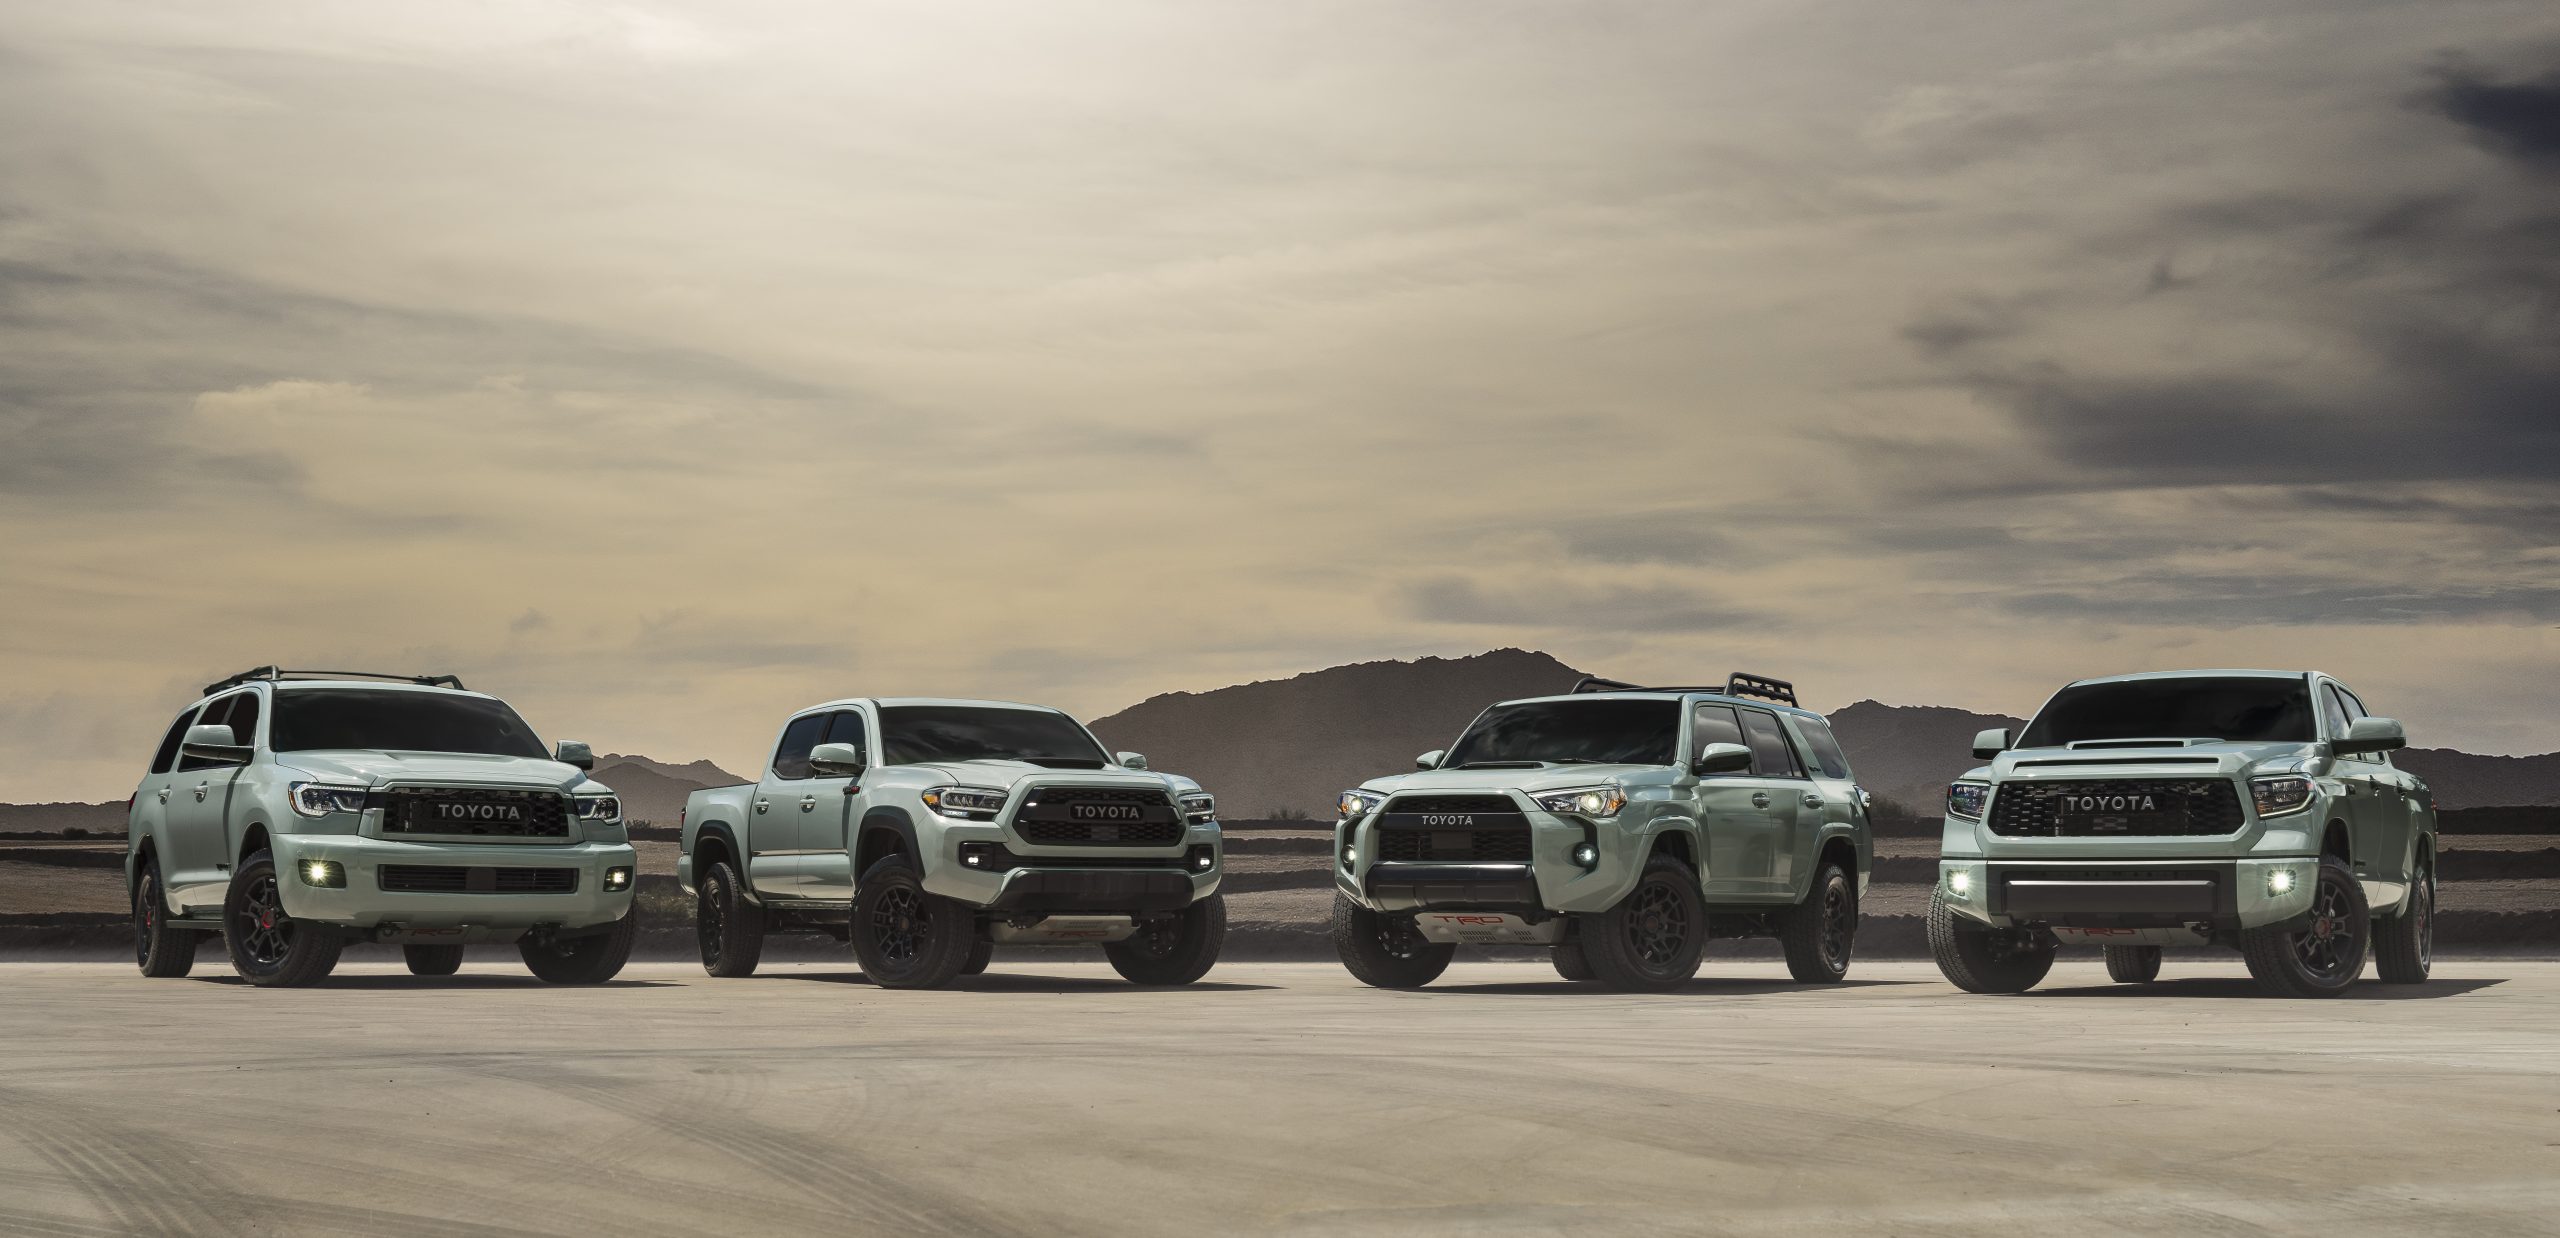 Trd Pro To Add Out Of This World Color For Models Toyota